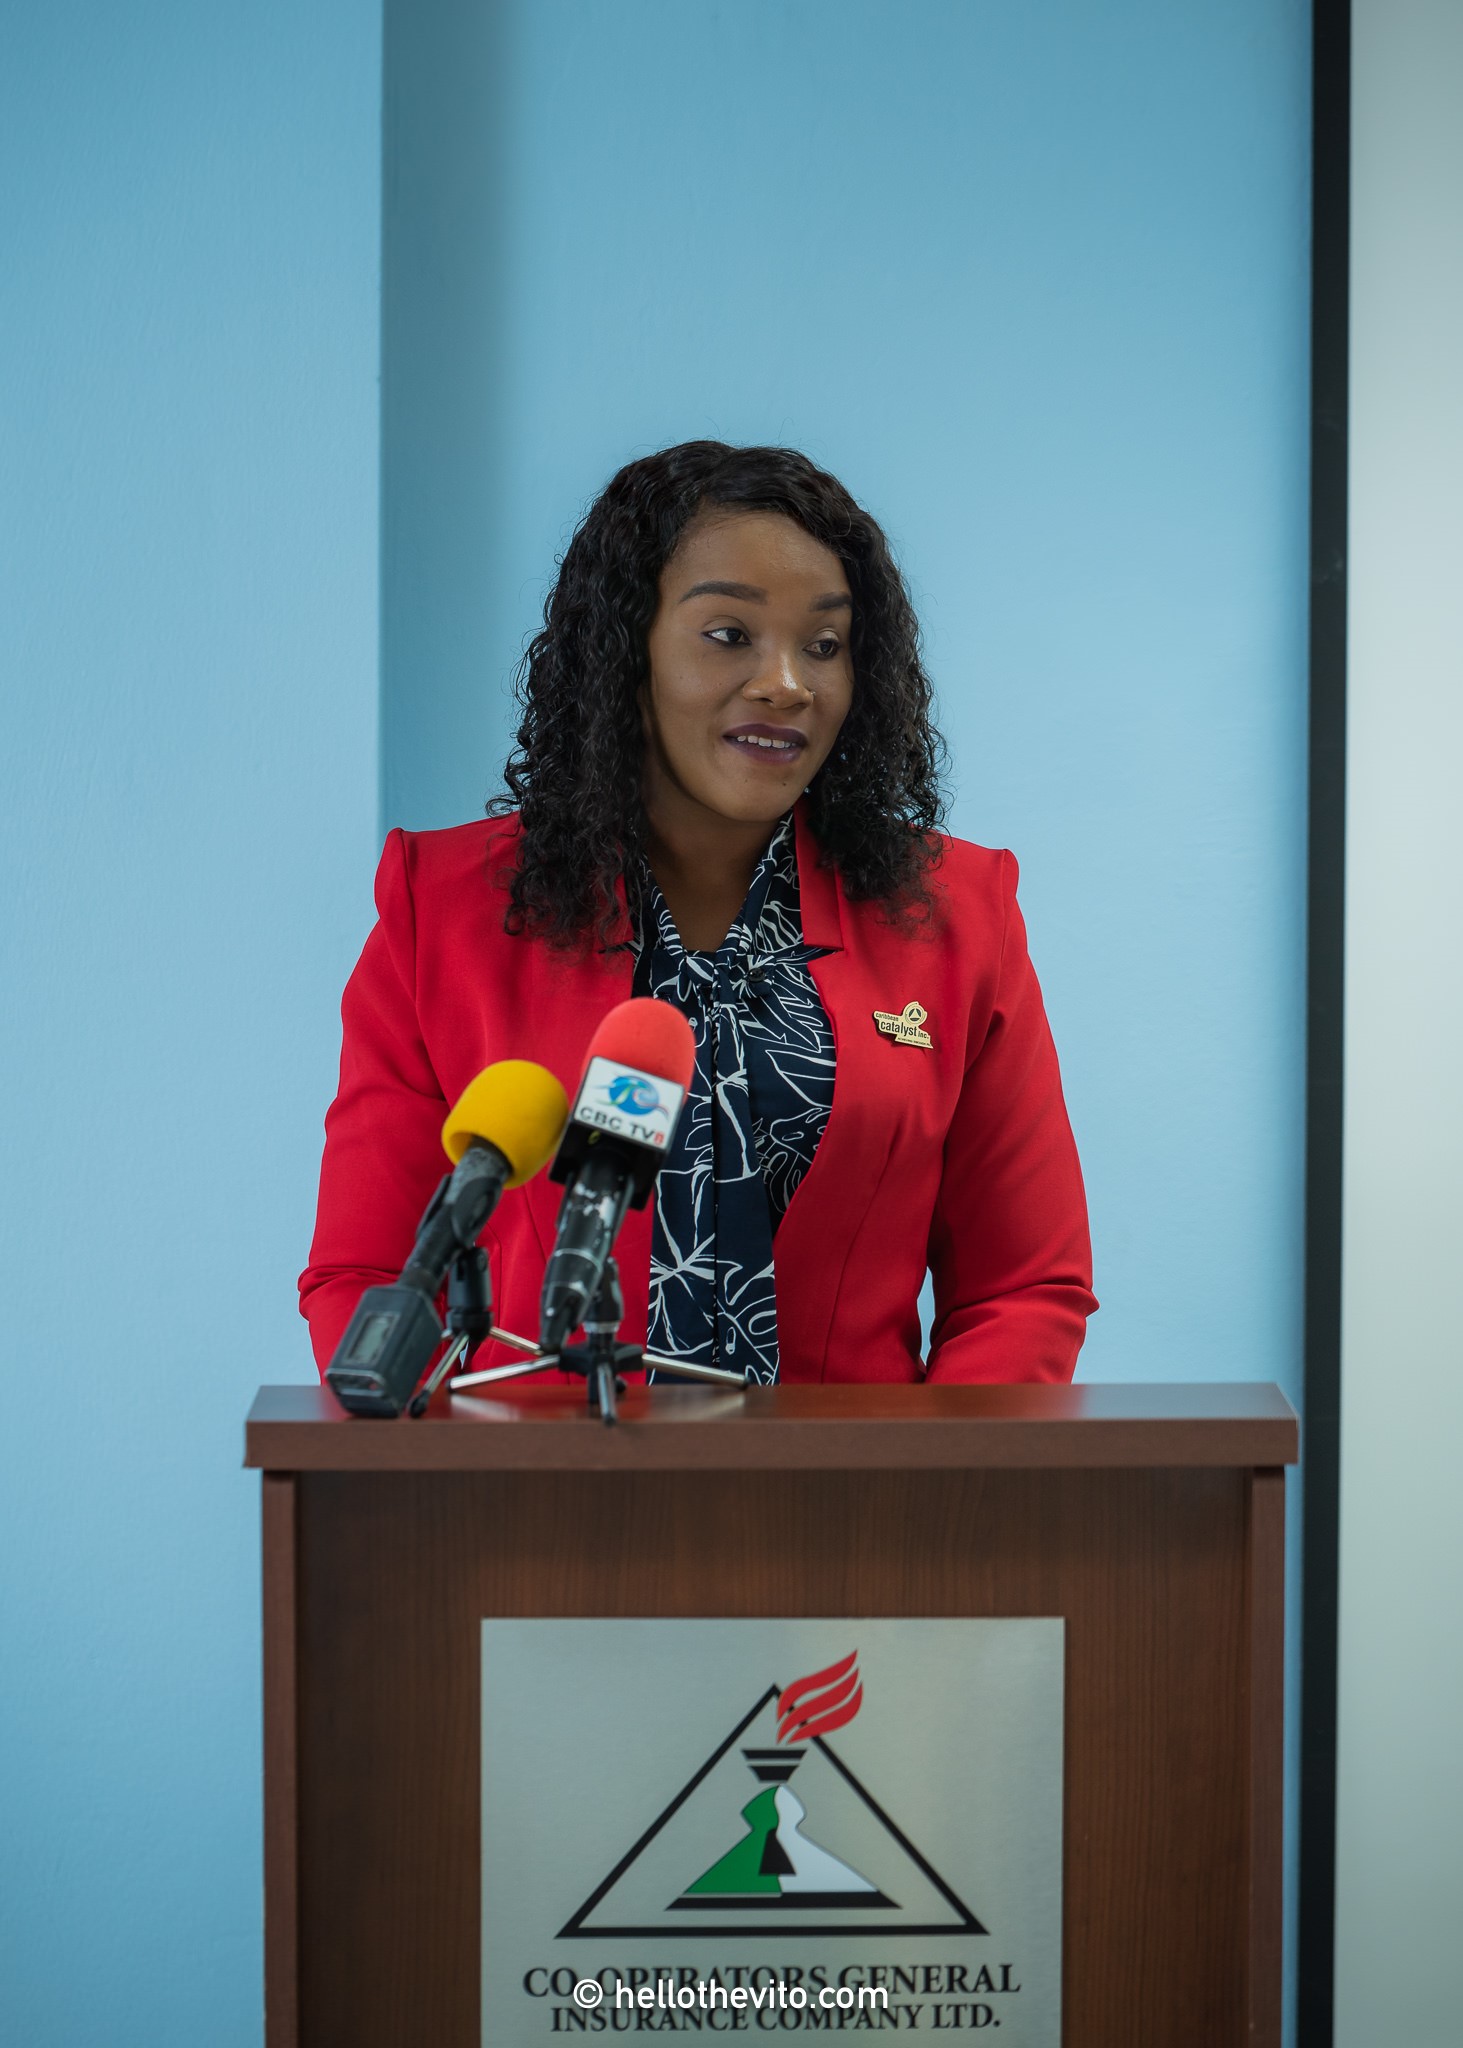 Junelle Brathwaite, Consulting Support presenting the Vote of thanks